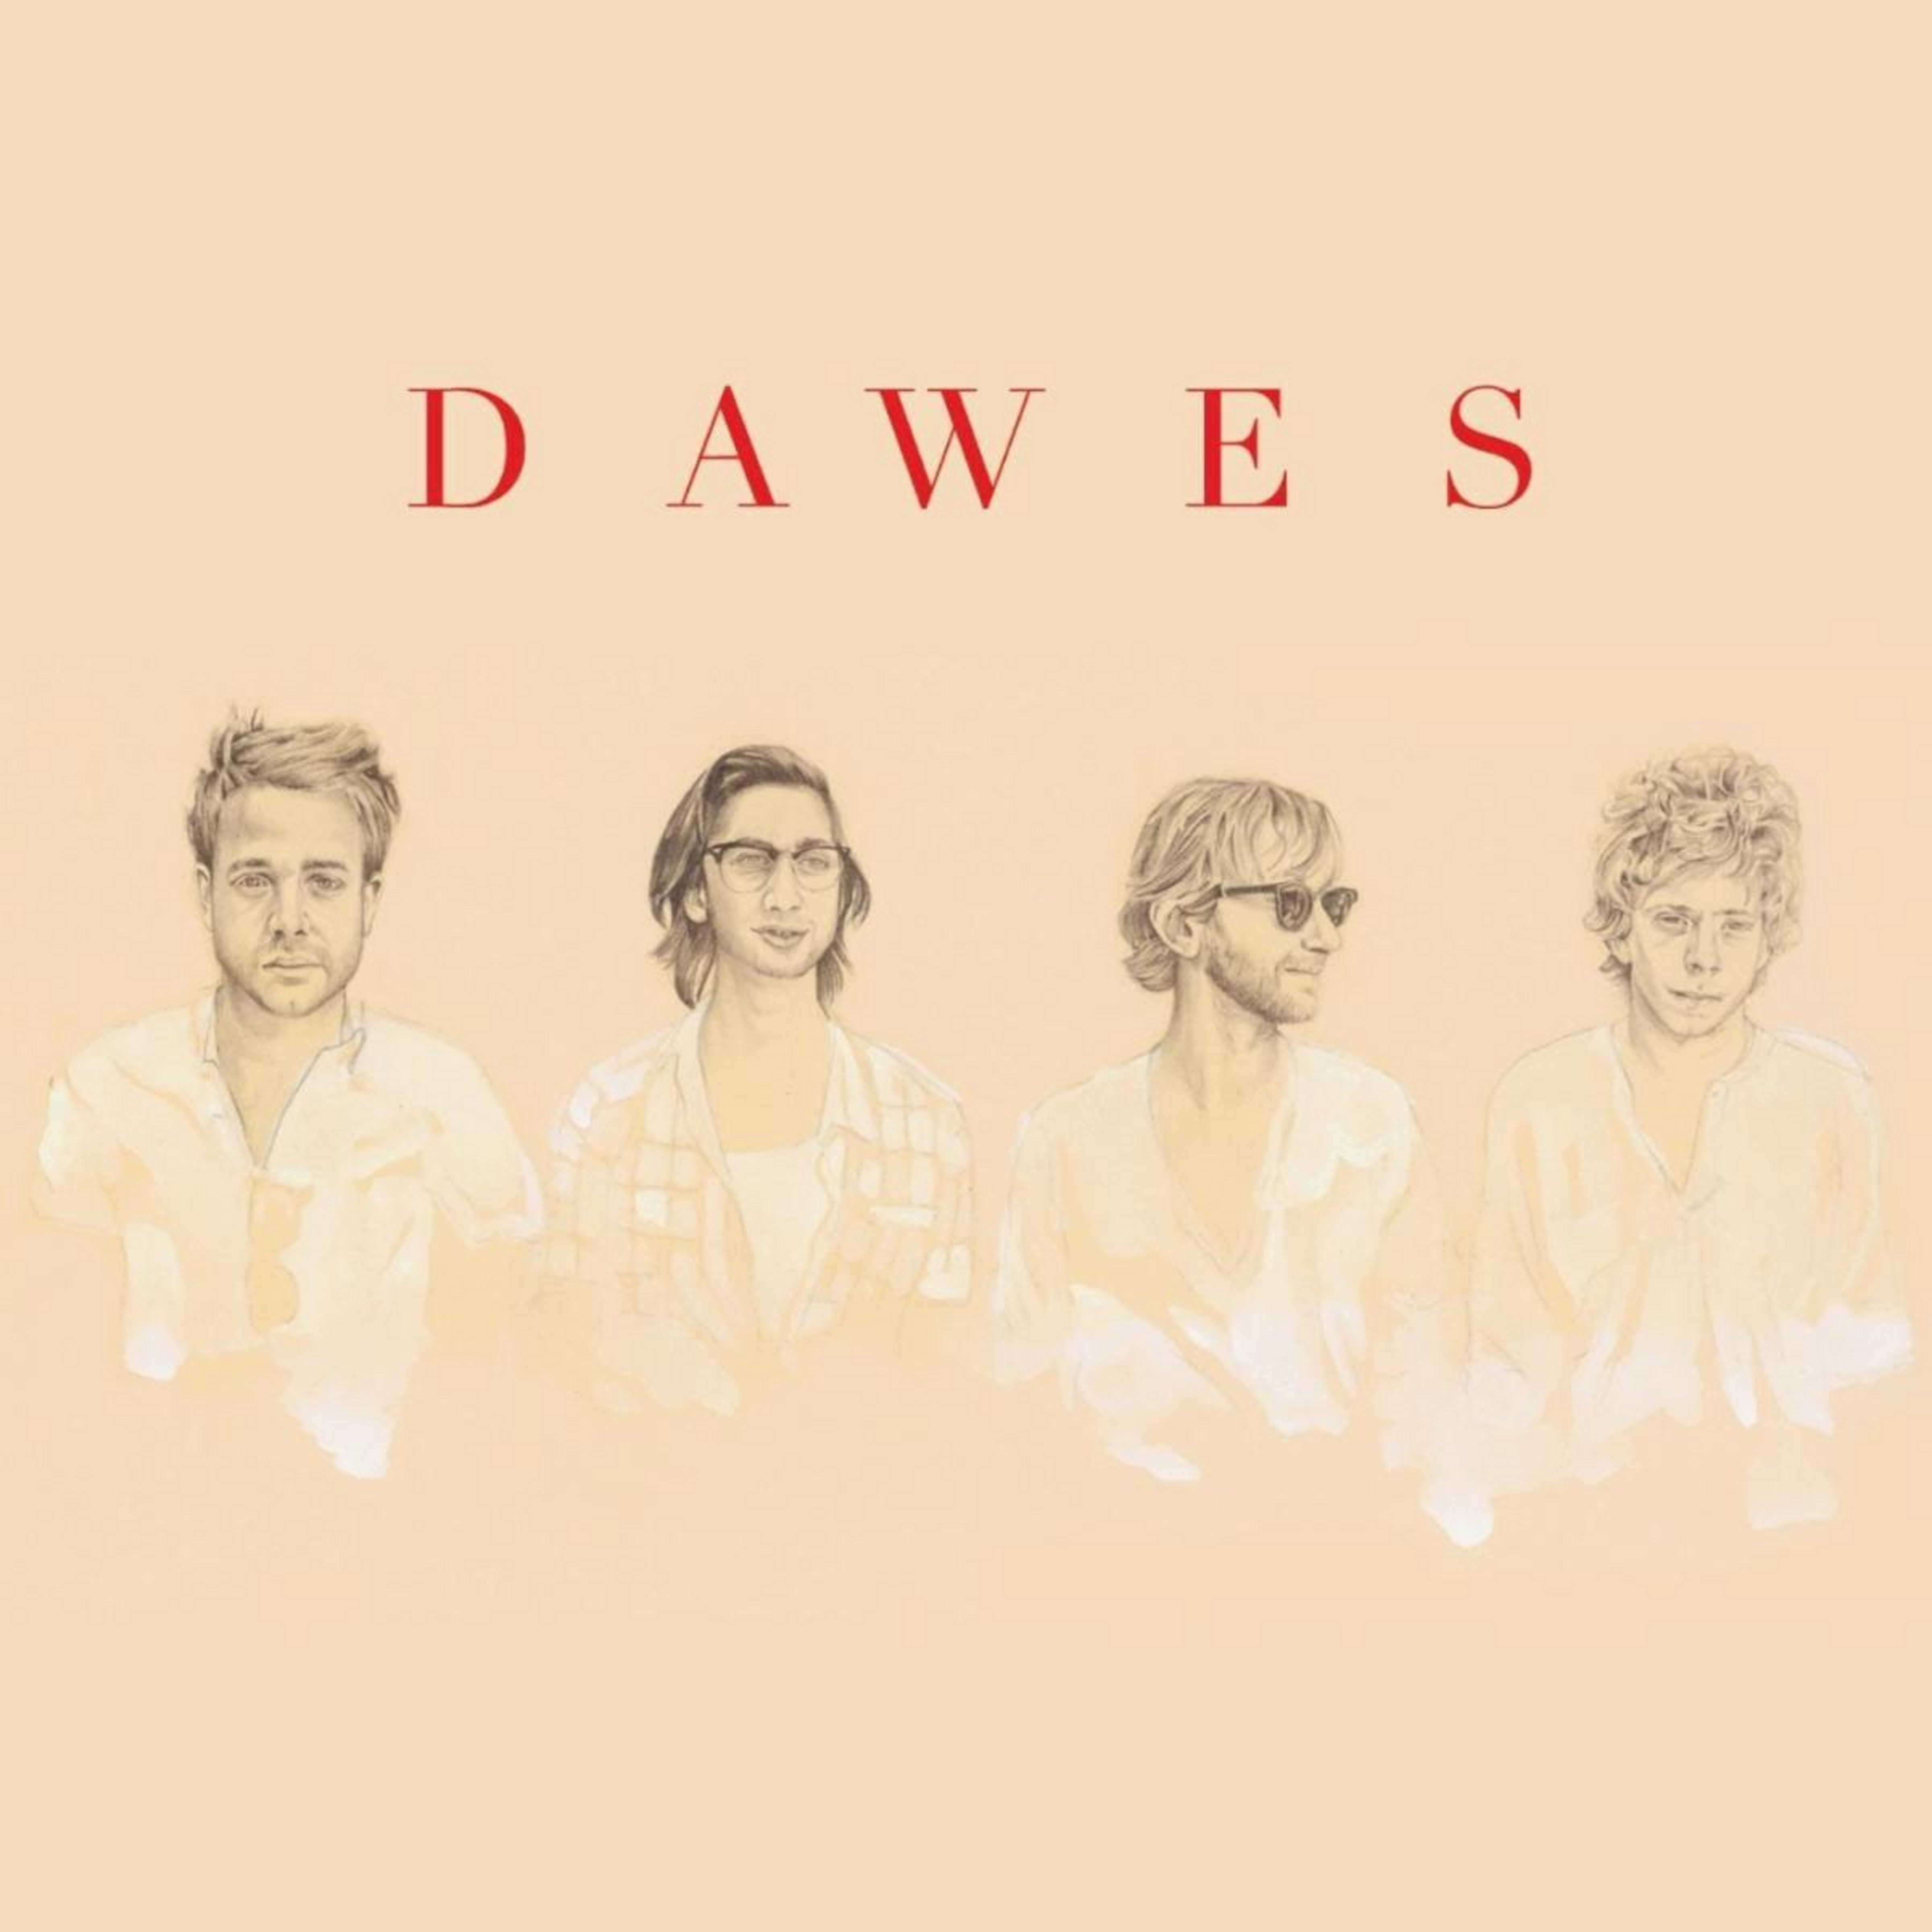 DAWES PERFORMING DEBUT NORTH HILLS IN ITS ENTIRETY FRIDAY, DEC. 4